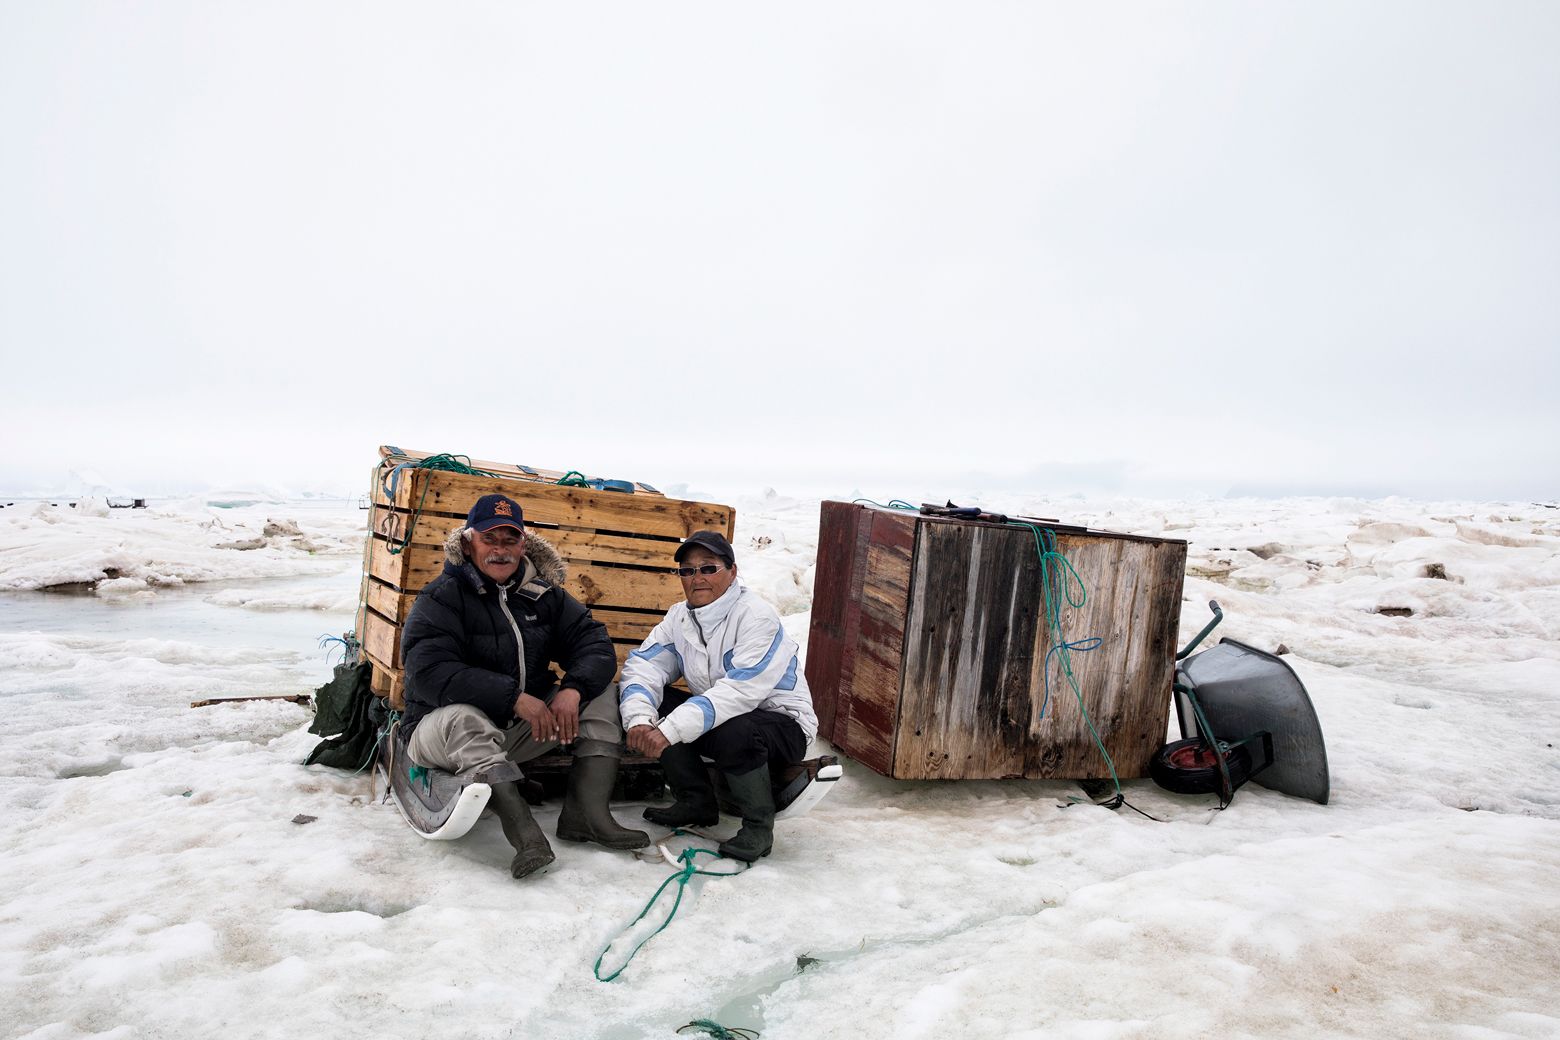 “The situation here isn’t new and surely can’t get any worse,” say Inukitsorsuaq and Genovira Sadorana, a local couple who rely on hunting for their livelihoods.

But the science shows that, unfortunately, this may be optimistic. And as the climate changes, it isn’t just their homes and landscape that are at risk – it is their customs, cultural identity and very survival. Image by Anna Filipova. Greenland, 2018.